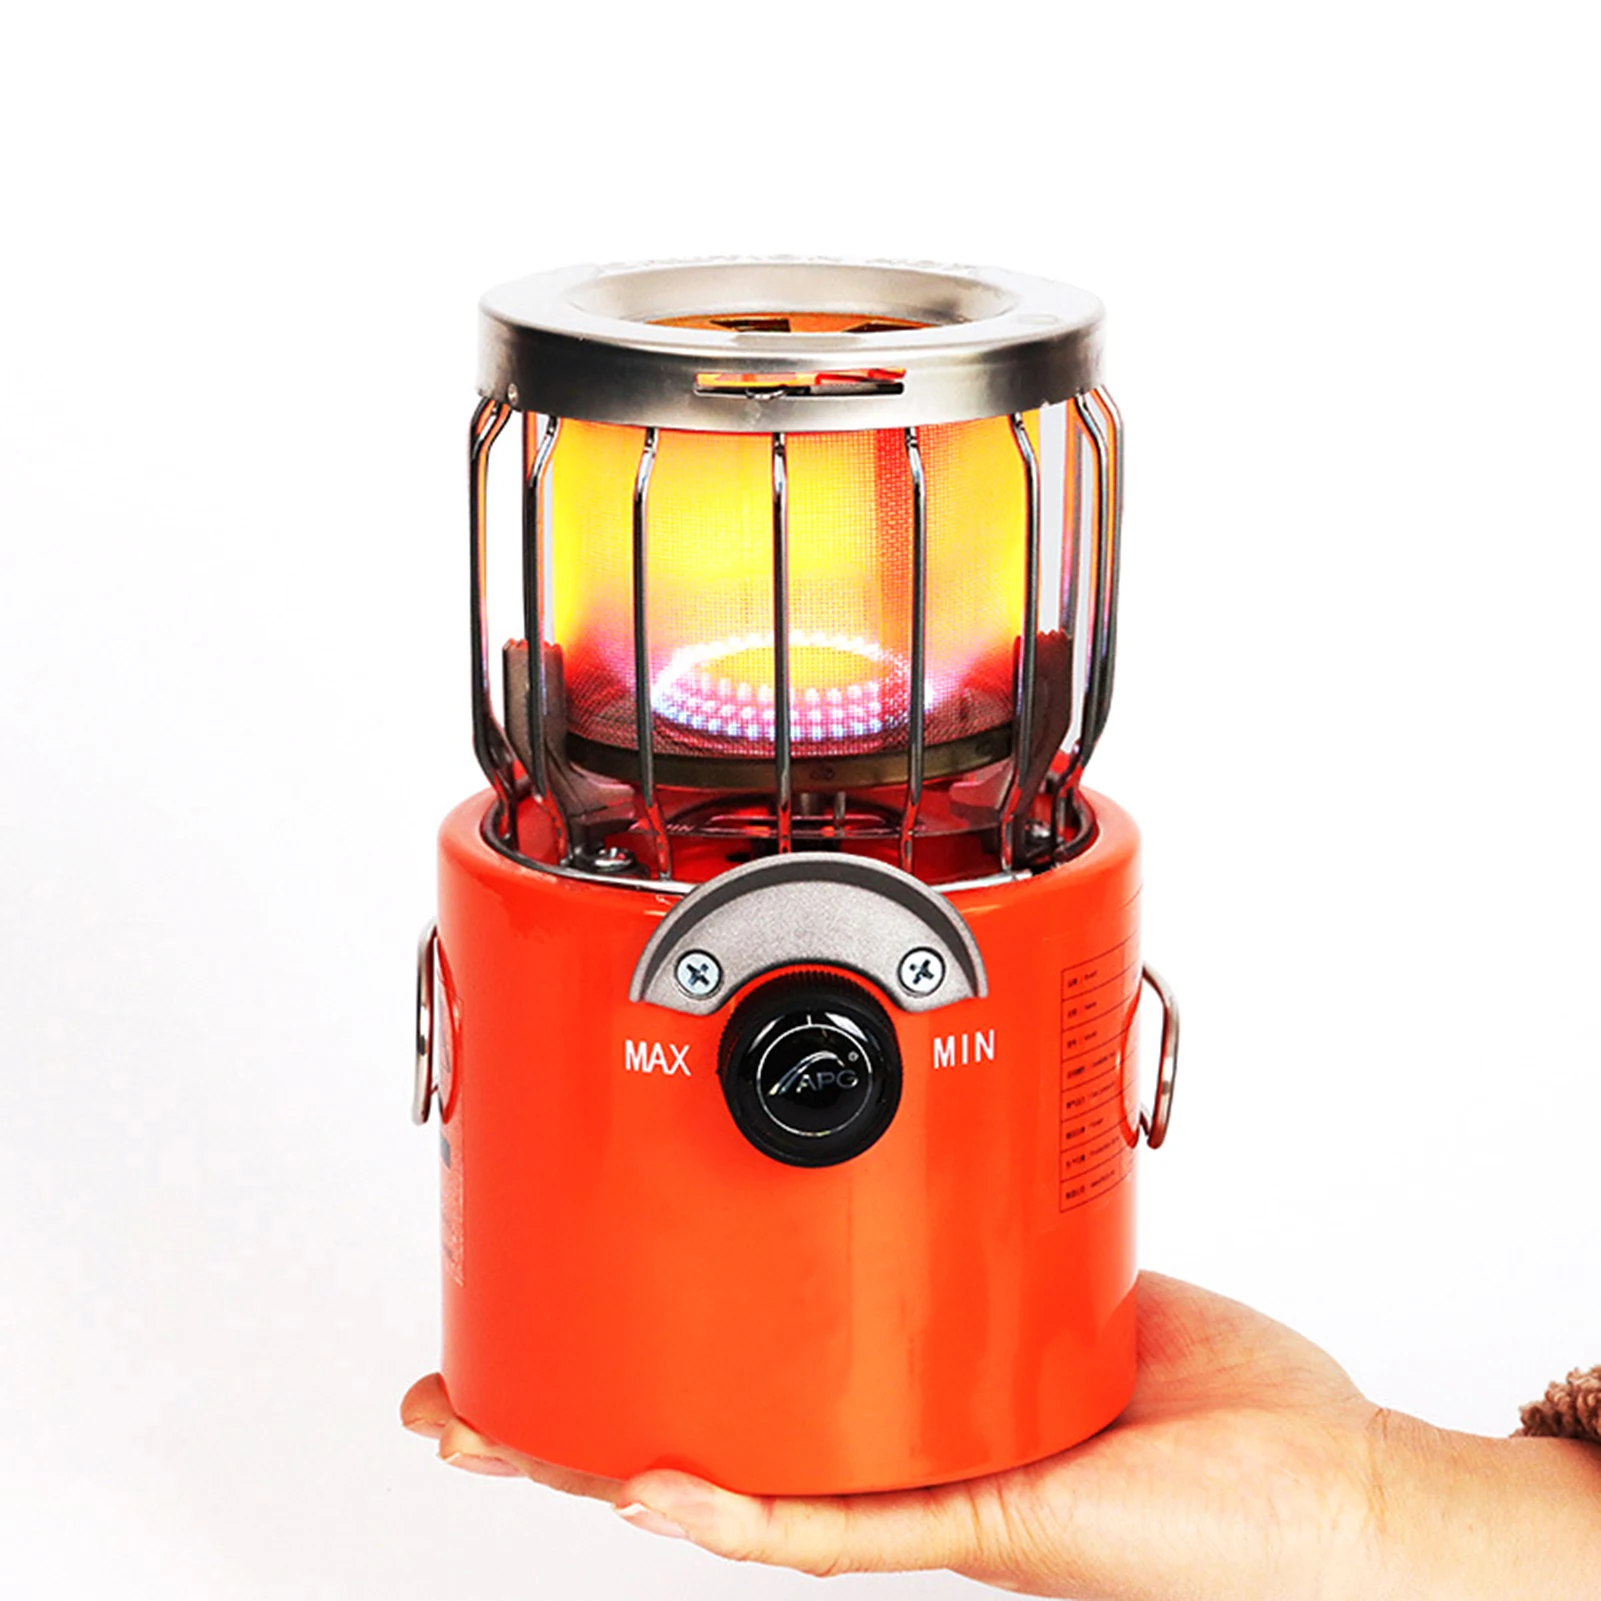 

Outdoor Heater Stove 2000W Portable Mini Gas Heater Camping Stove Heating Cooker for Cooking BBQ Backpacking Ice Fishing Hiking